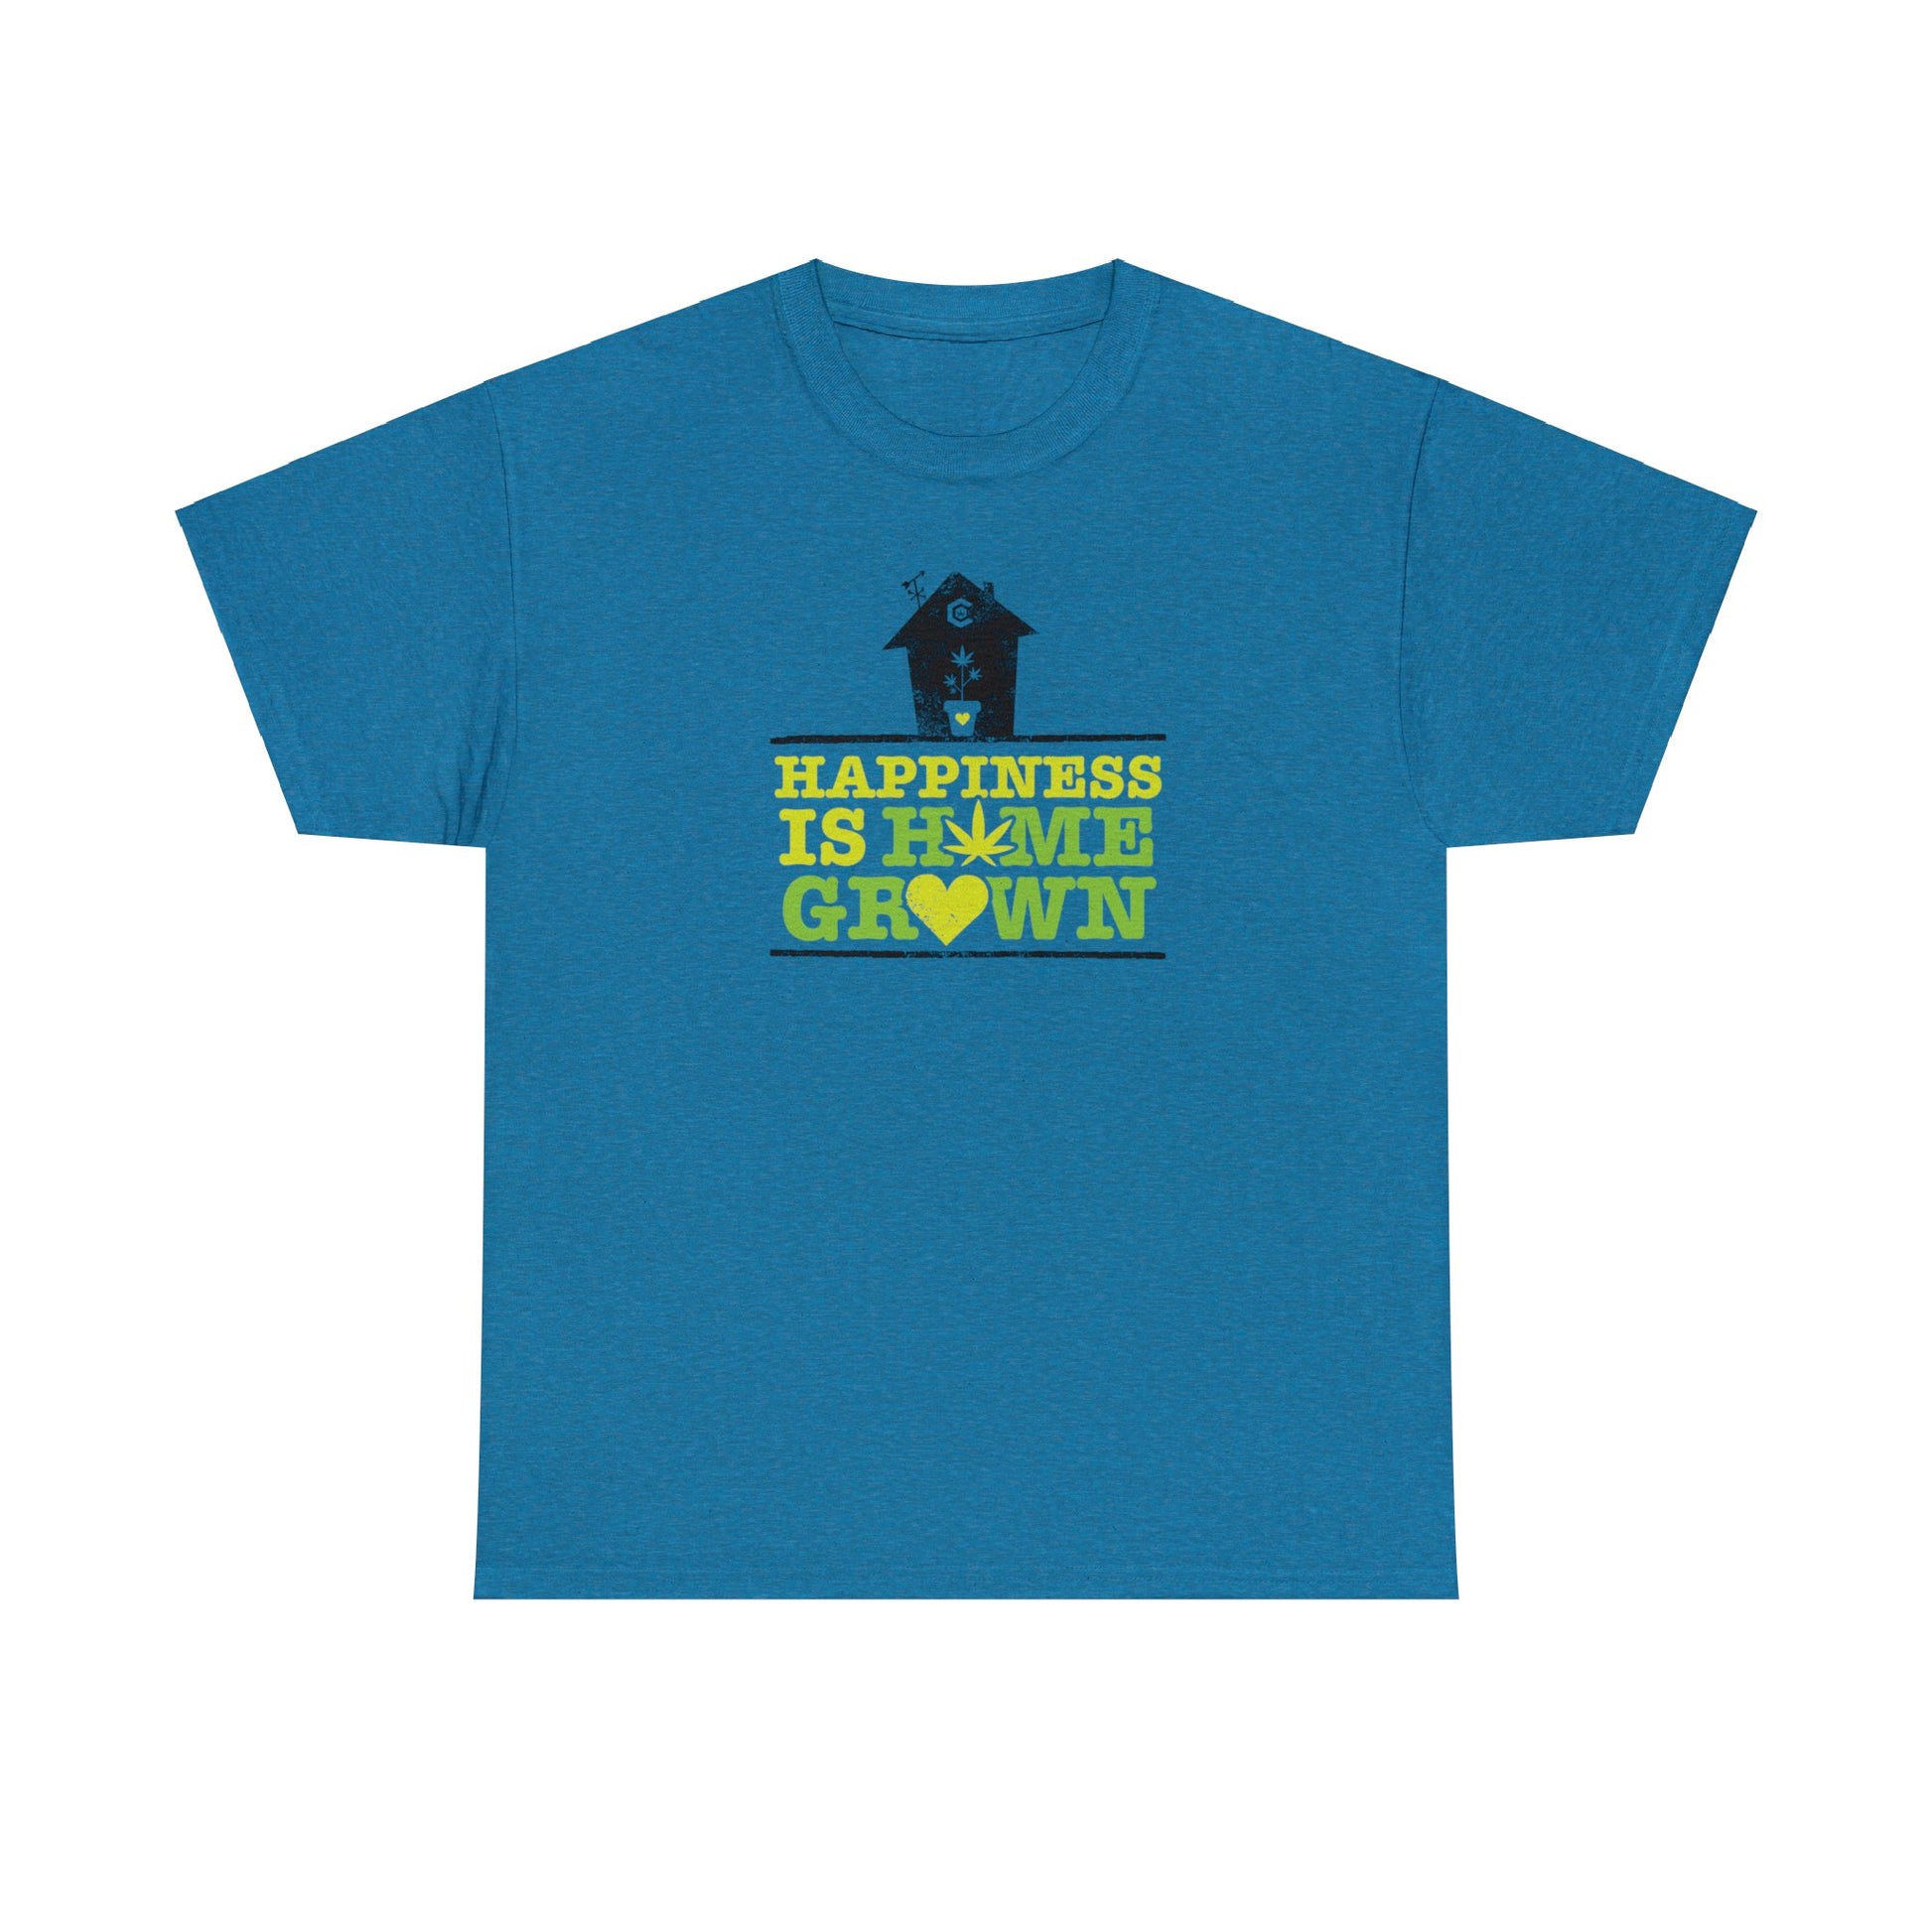 A Happiness Is Homegrown Pot Shirt with a house and crown design.